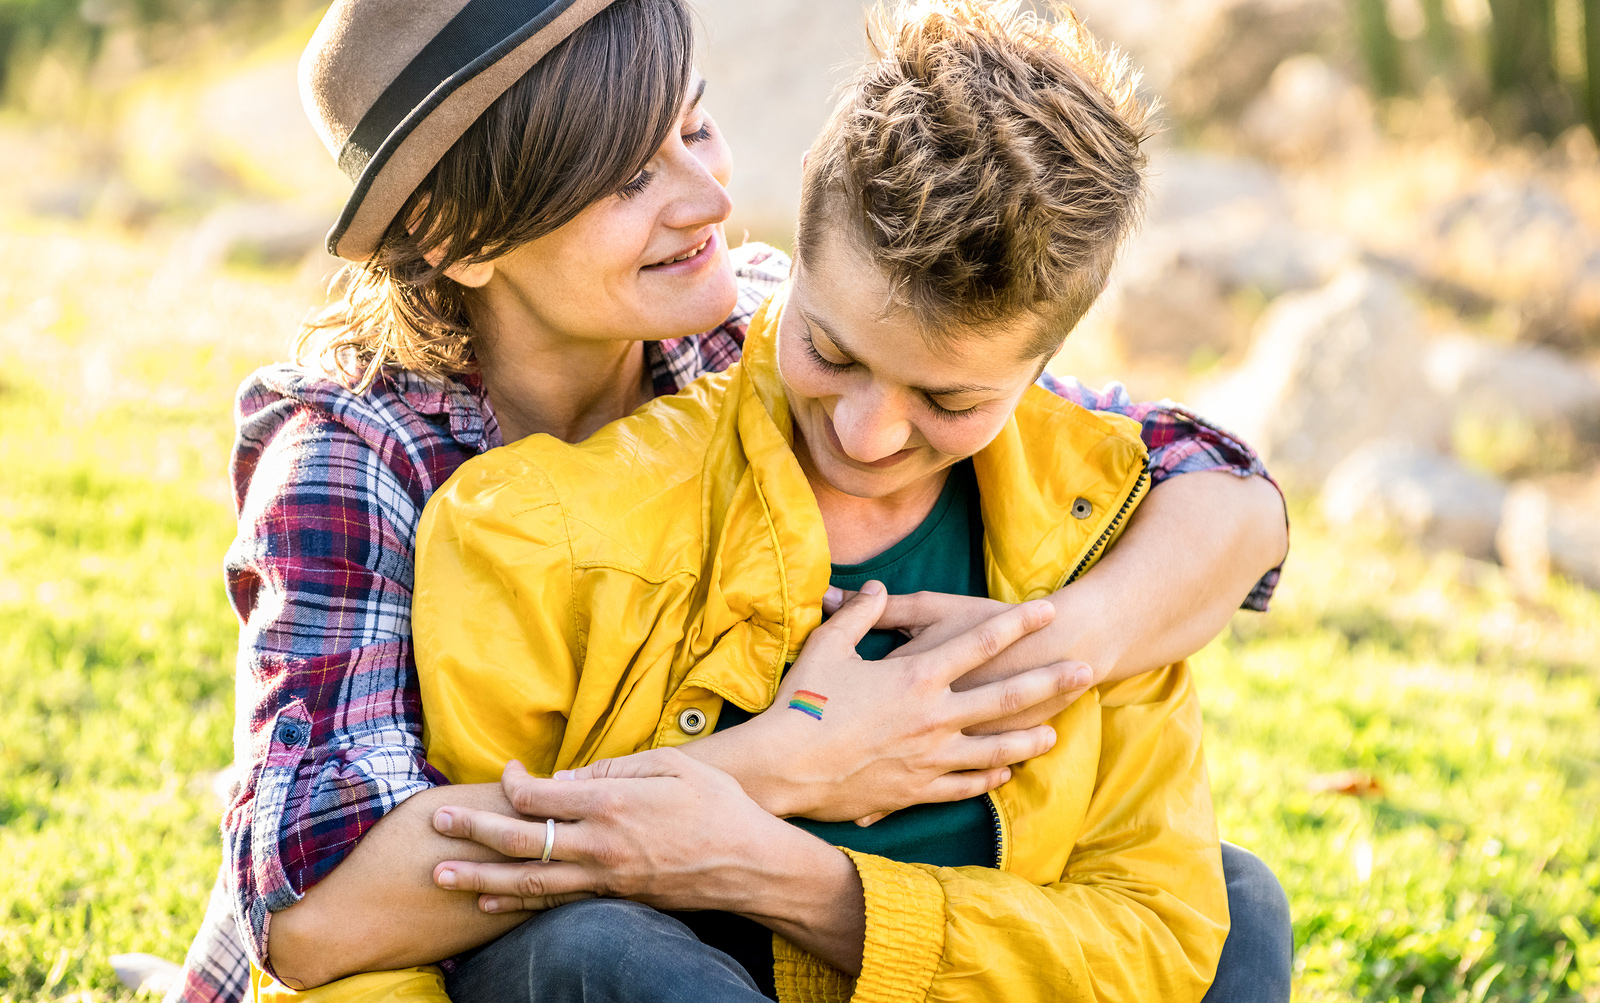 lesbian couple in the park hugging and looking in love | Counseling for life transition in Baltimore, MD 21210 | Coming out in therapy | LGTBQ affirming therapist" width="300" height="188" 